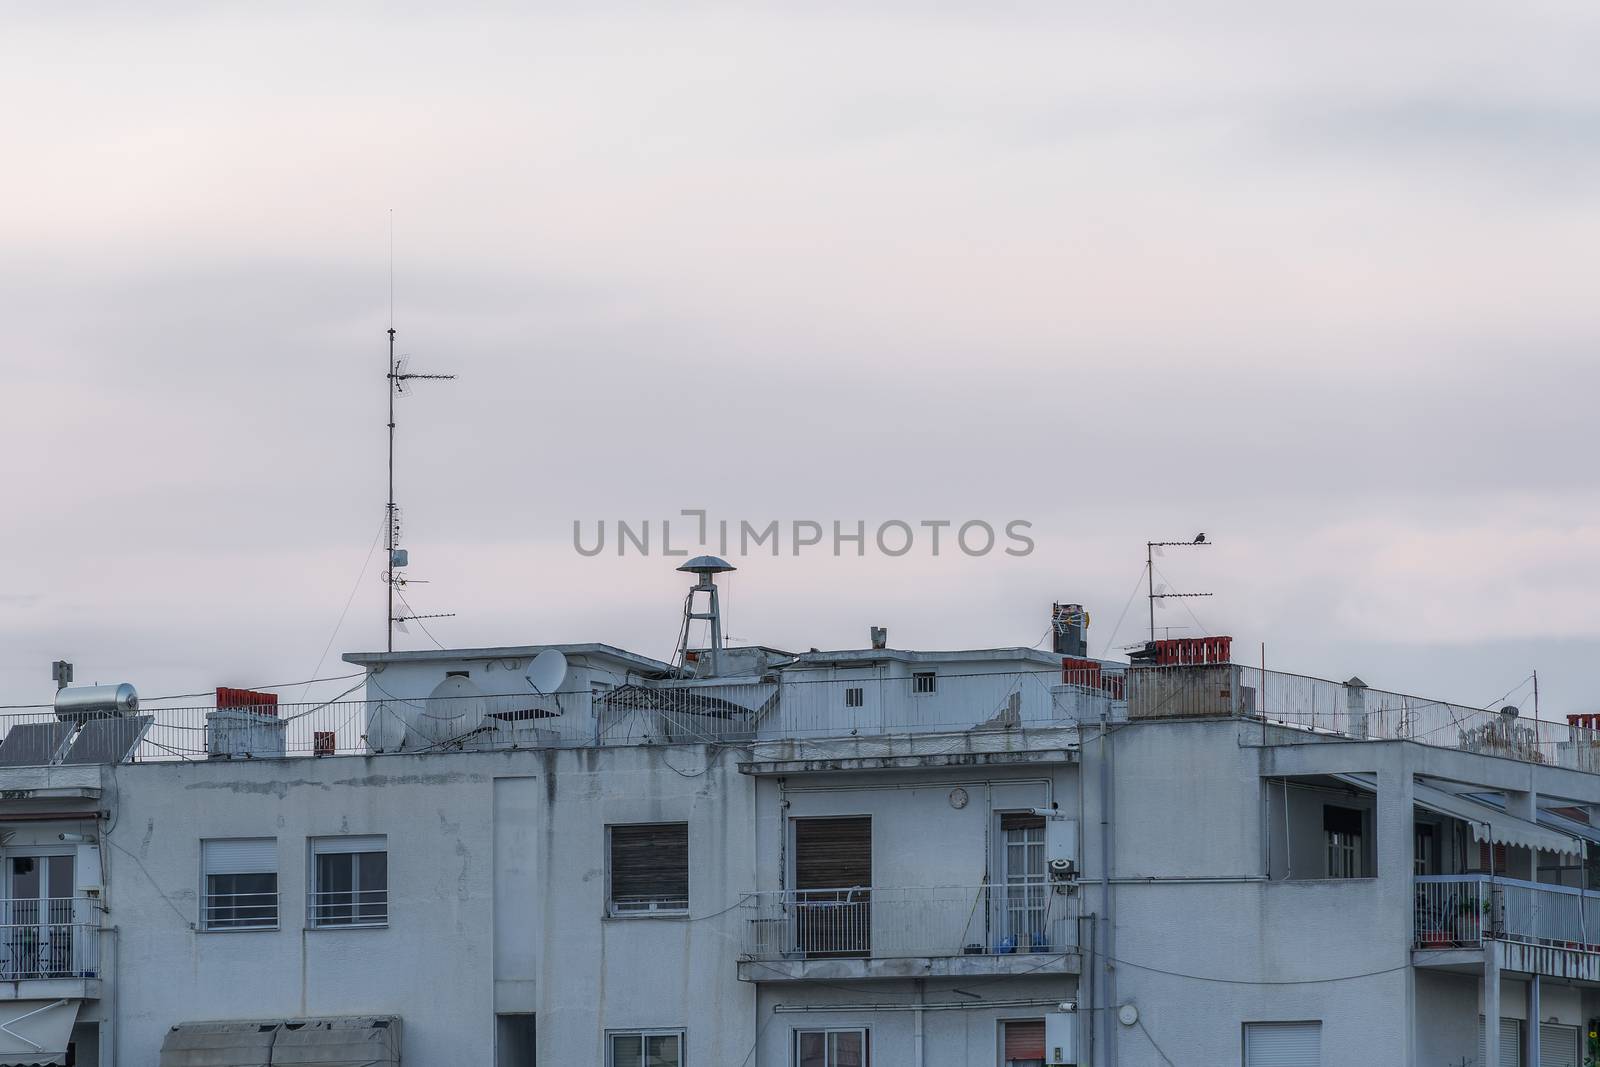 Evening view of old mushroom shaped attack warning siren, between antennas and satellite dishes on top of city houses in Thessaloniki, Greece.